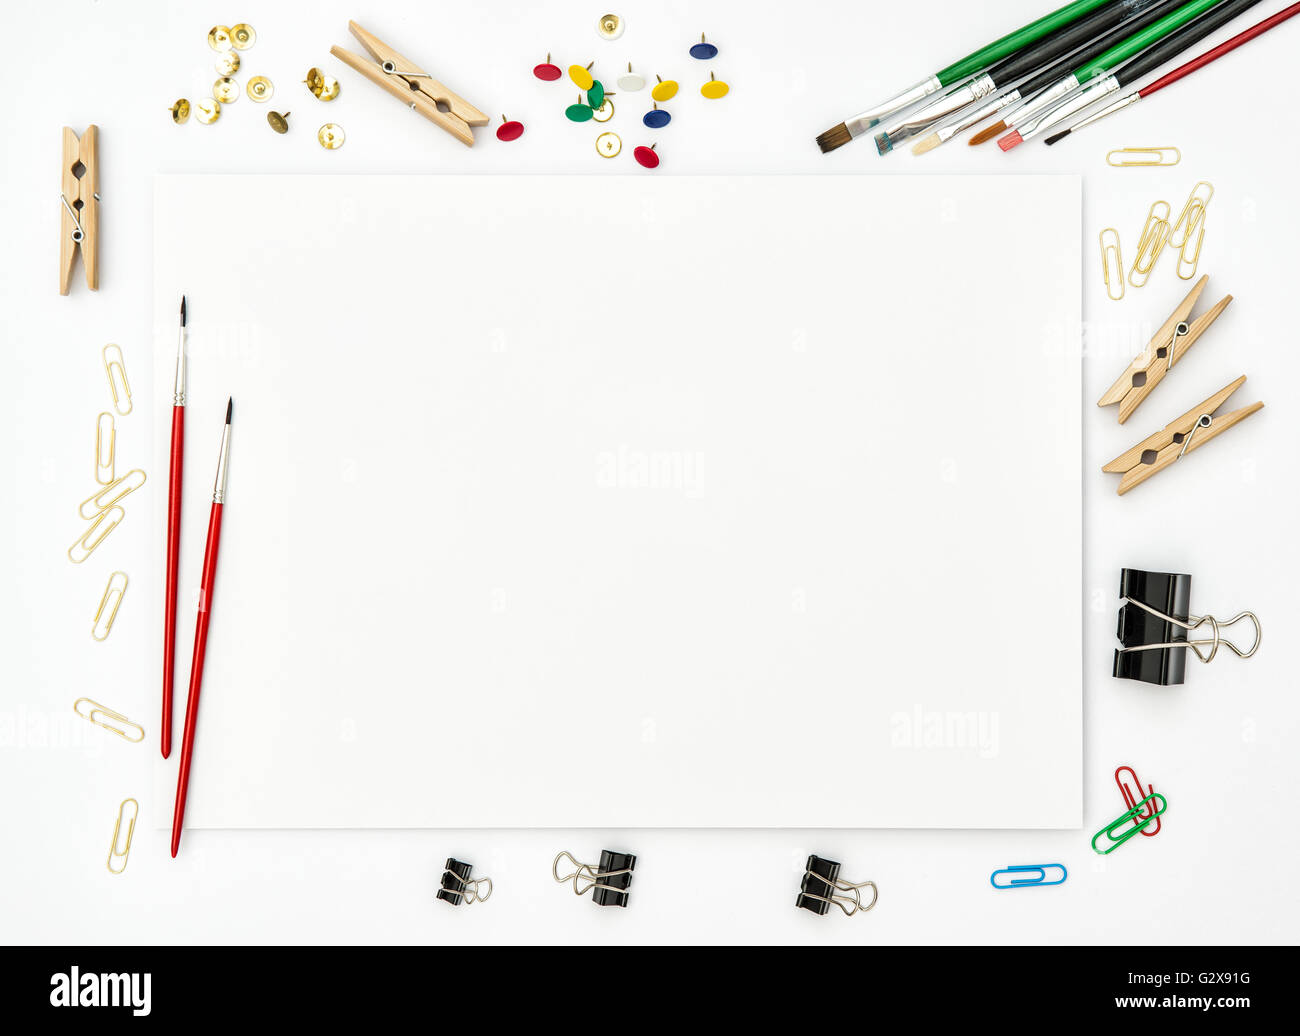 Sketchbook, brushes, paper, office supplies on white background. Flat lay. Creative art concept Stock Photo